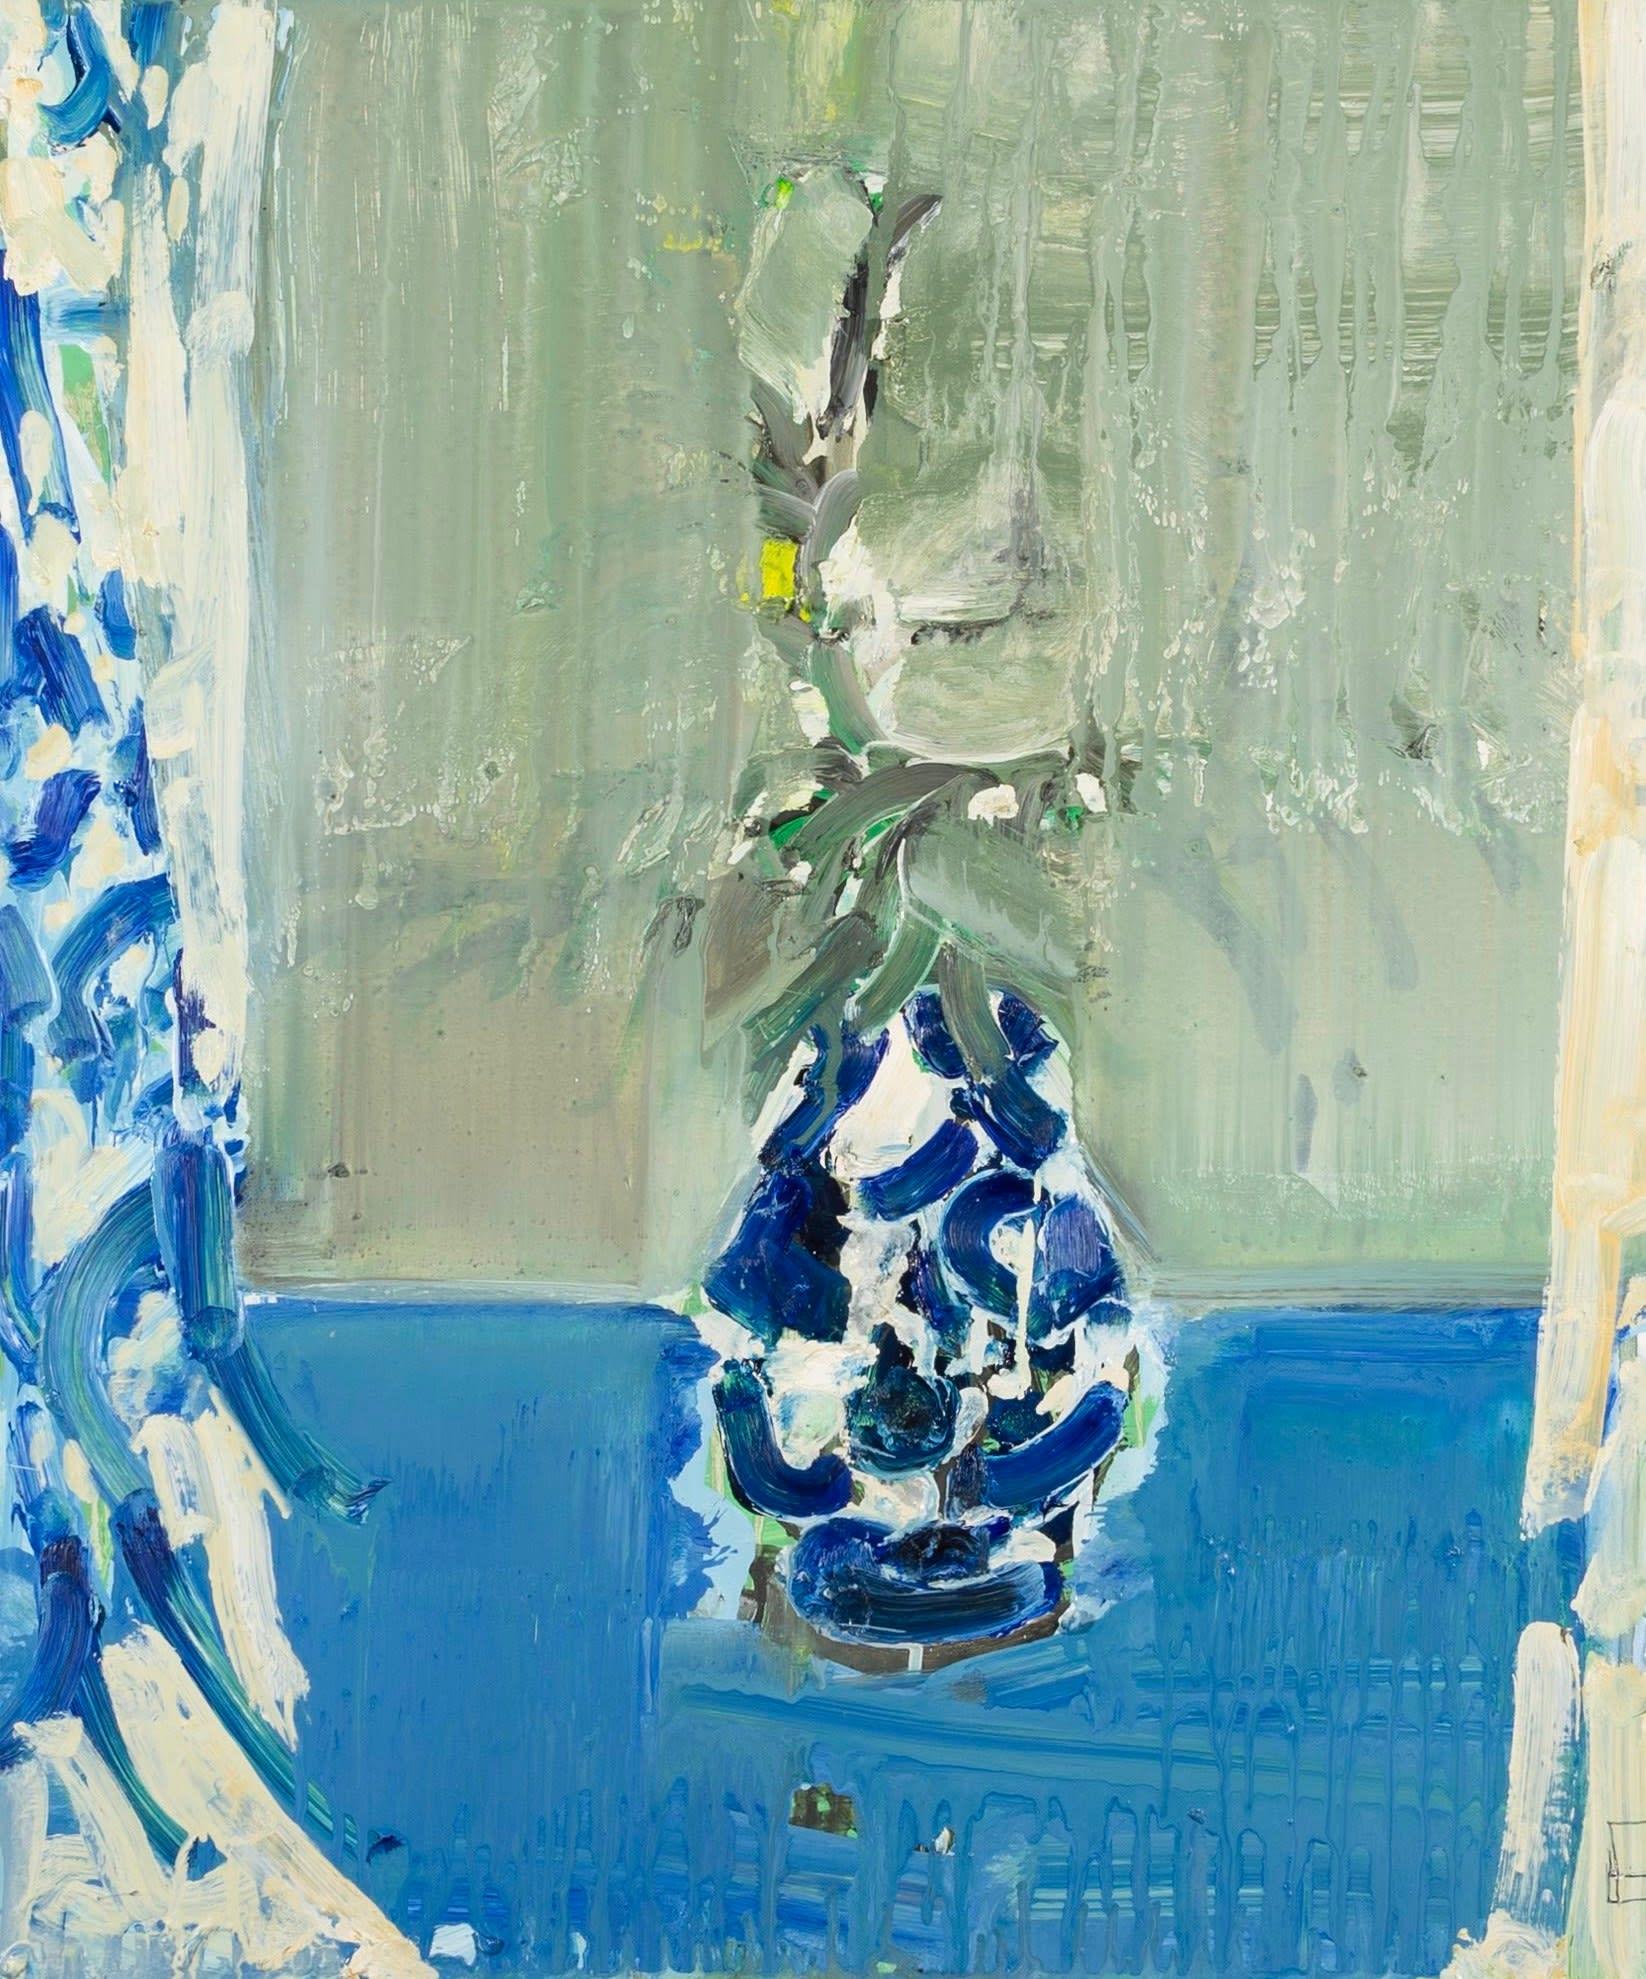 Winter Twig; Wet Window, Oil on Gesso Board Painting by Ffiona Lewis, 2023 - Art by Unknown